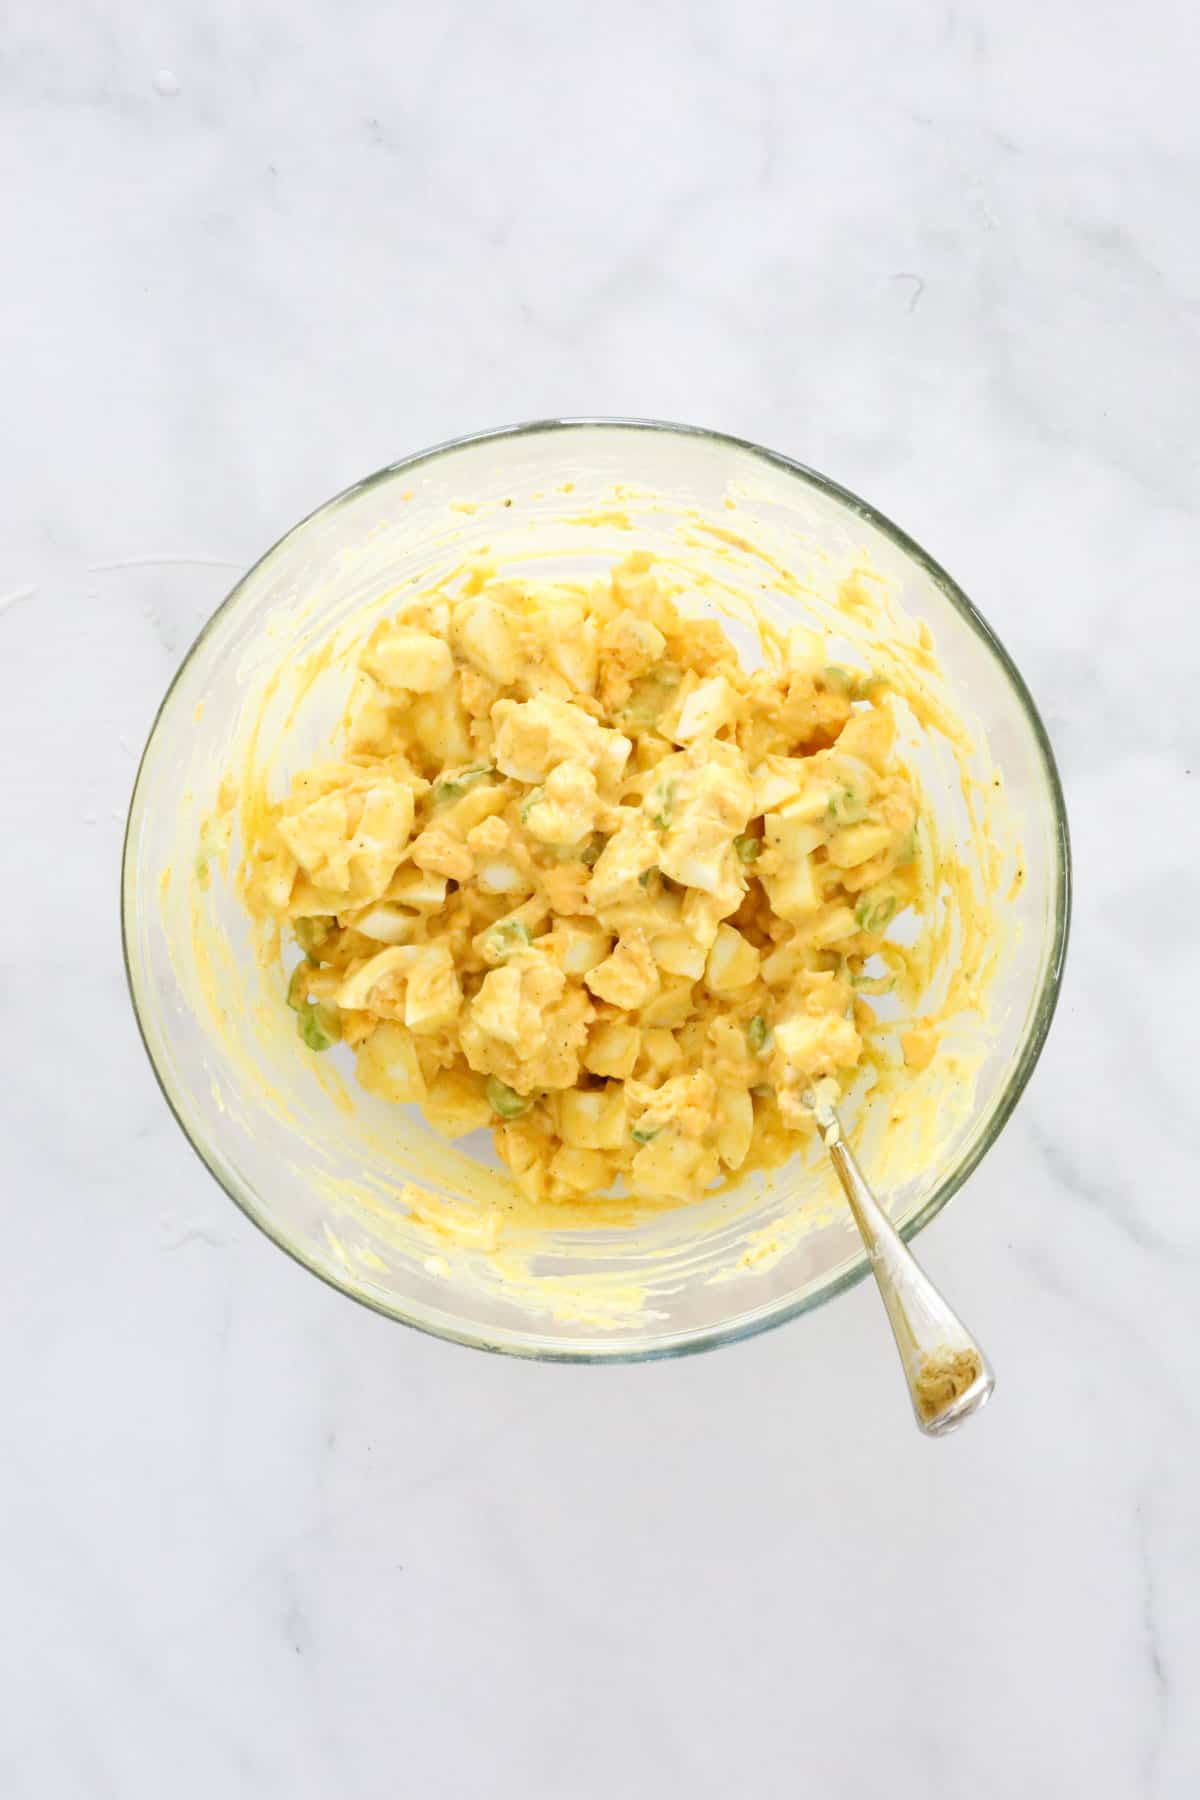 Chopped egg and dressing mixed together in a bowl.